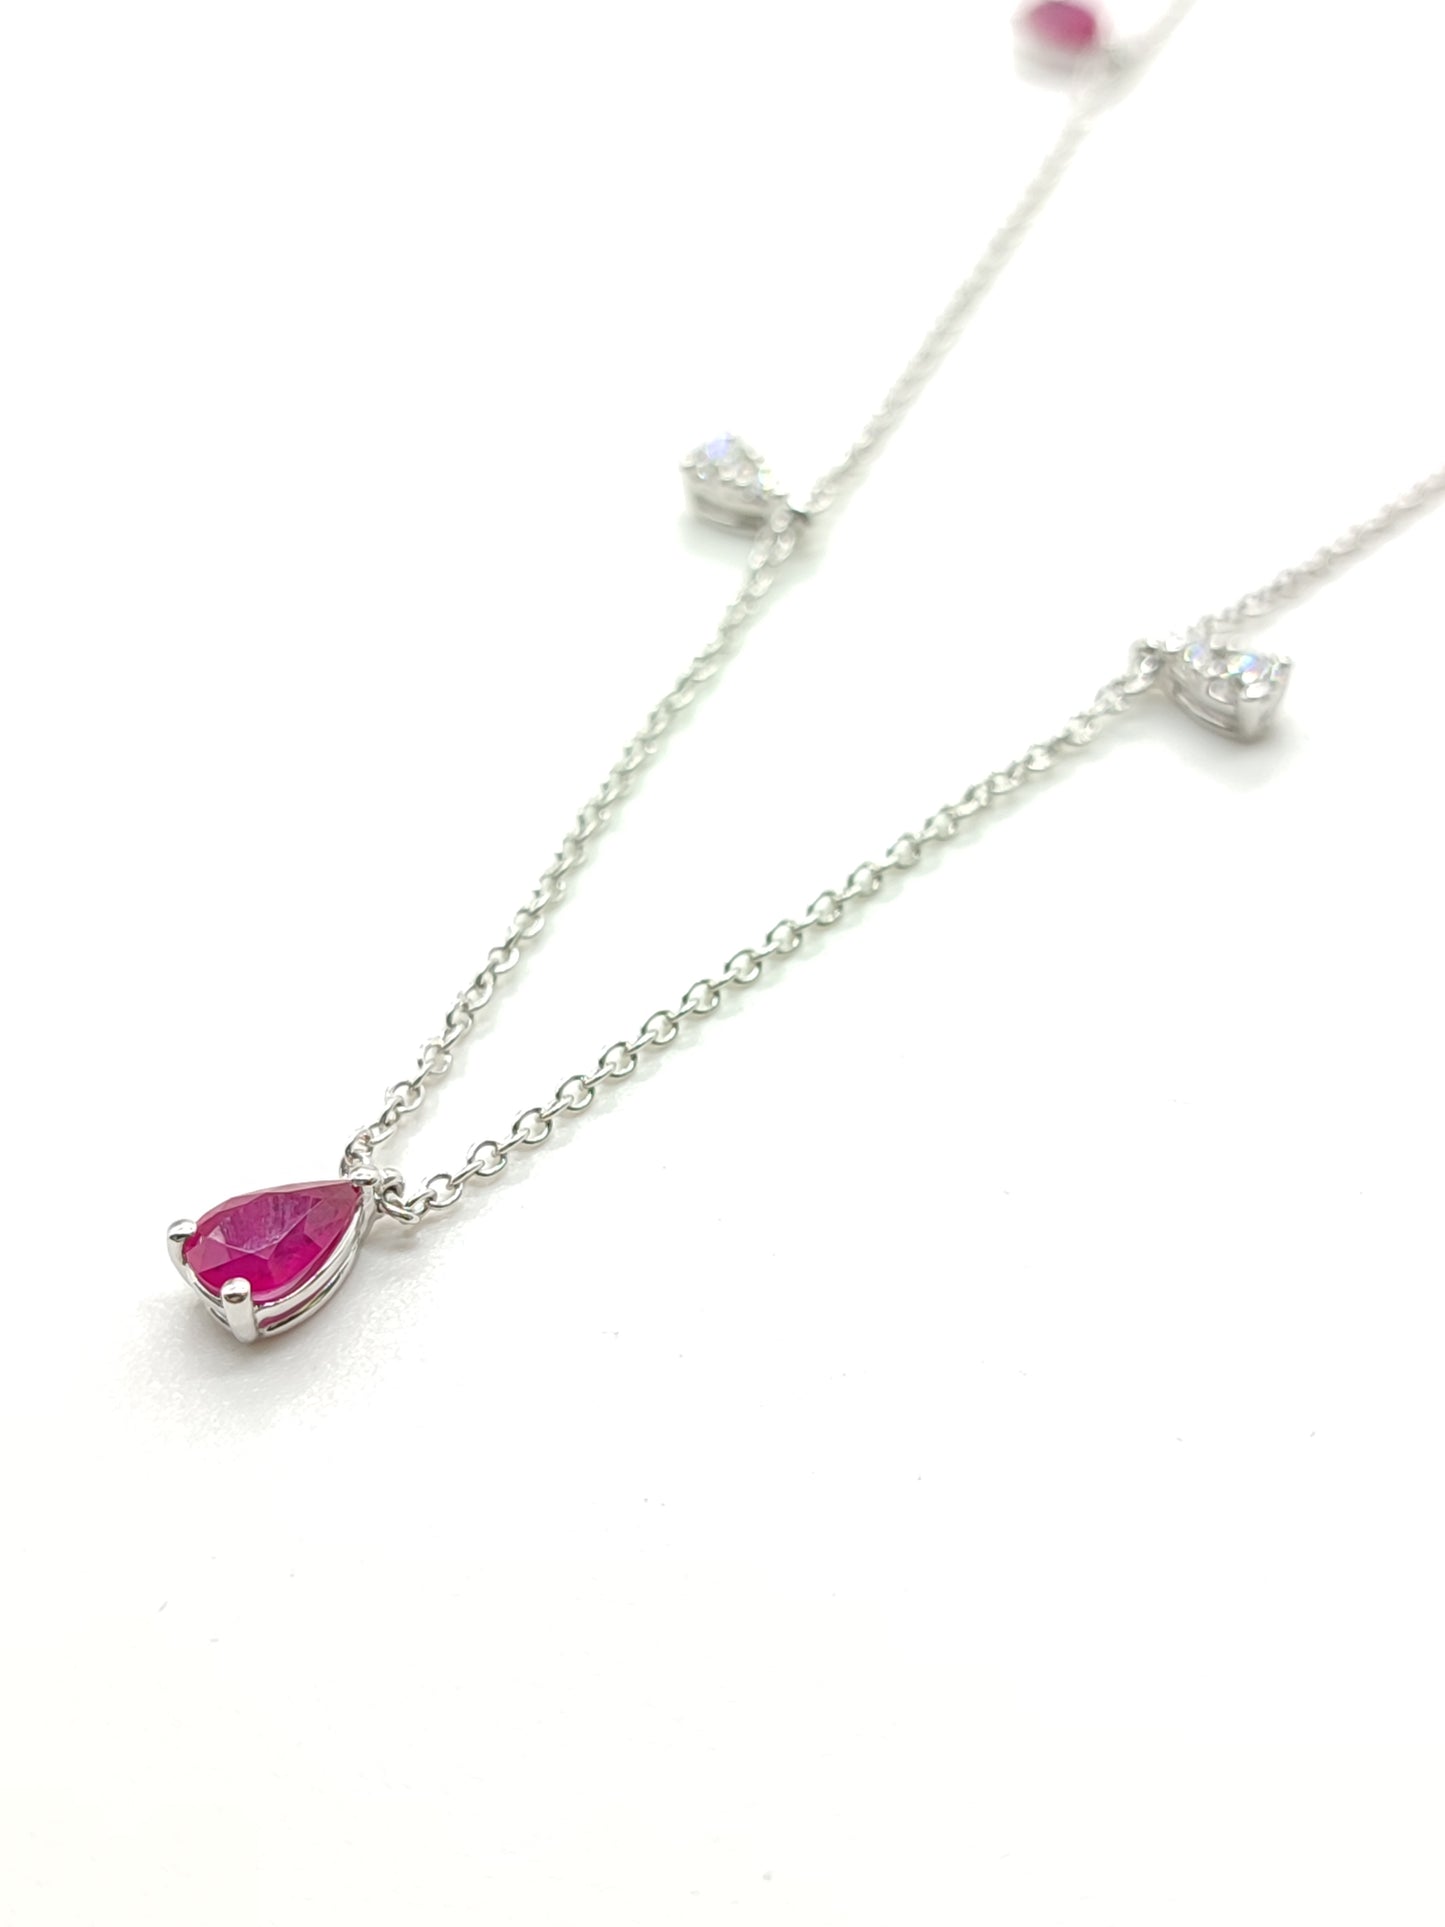 White gold necklace with diamonds and rubies